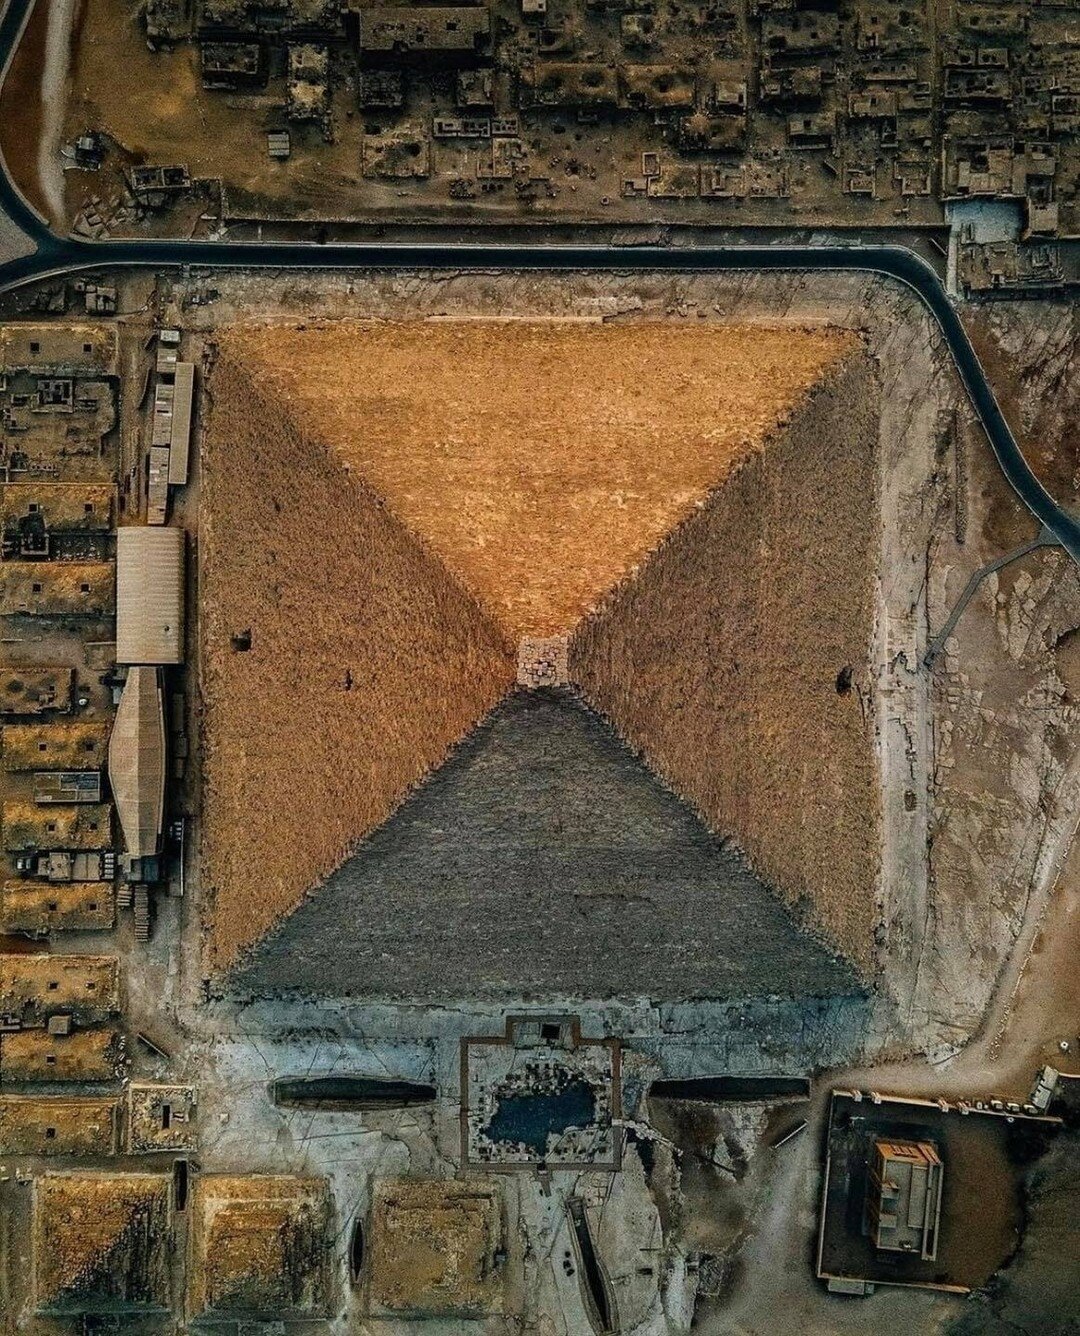 Swipe to zoom in on the Pyramid of Khufu 📸👈 ⁠
⁠⁠
The Pyramid of Khufu, the largest of the three, was built by the pharaoh Khufu containing about 2.3 million blocks of stone that were cut, transported, and assembled to create this magnificent struct